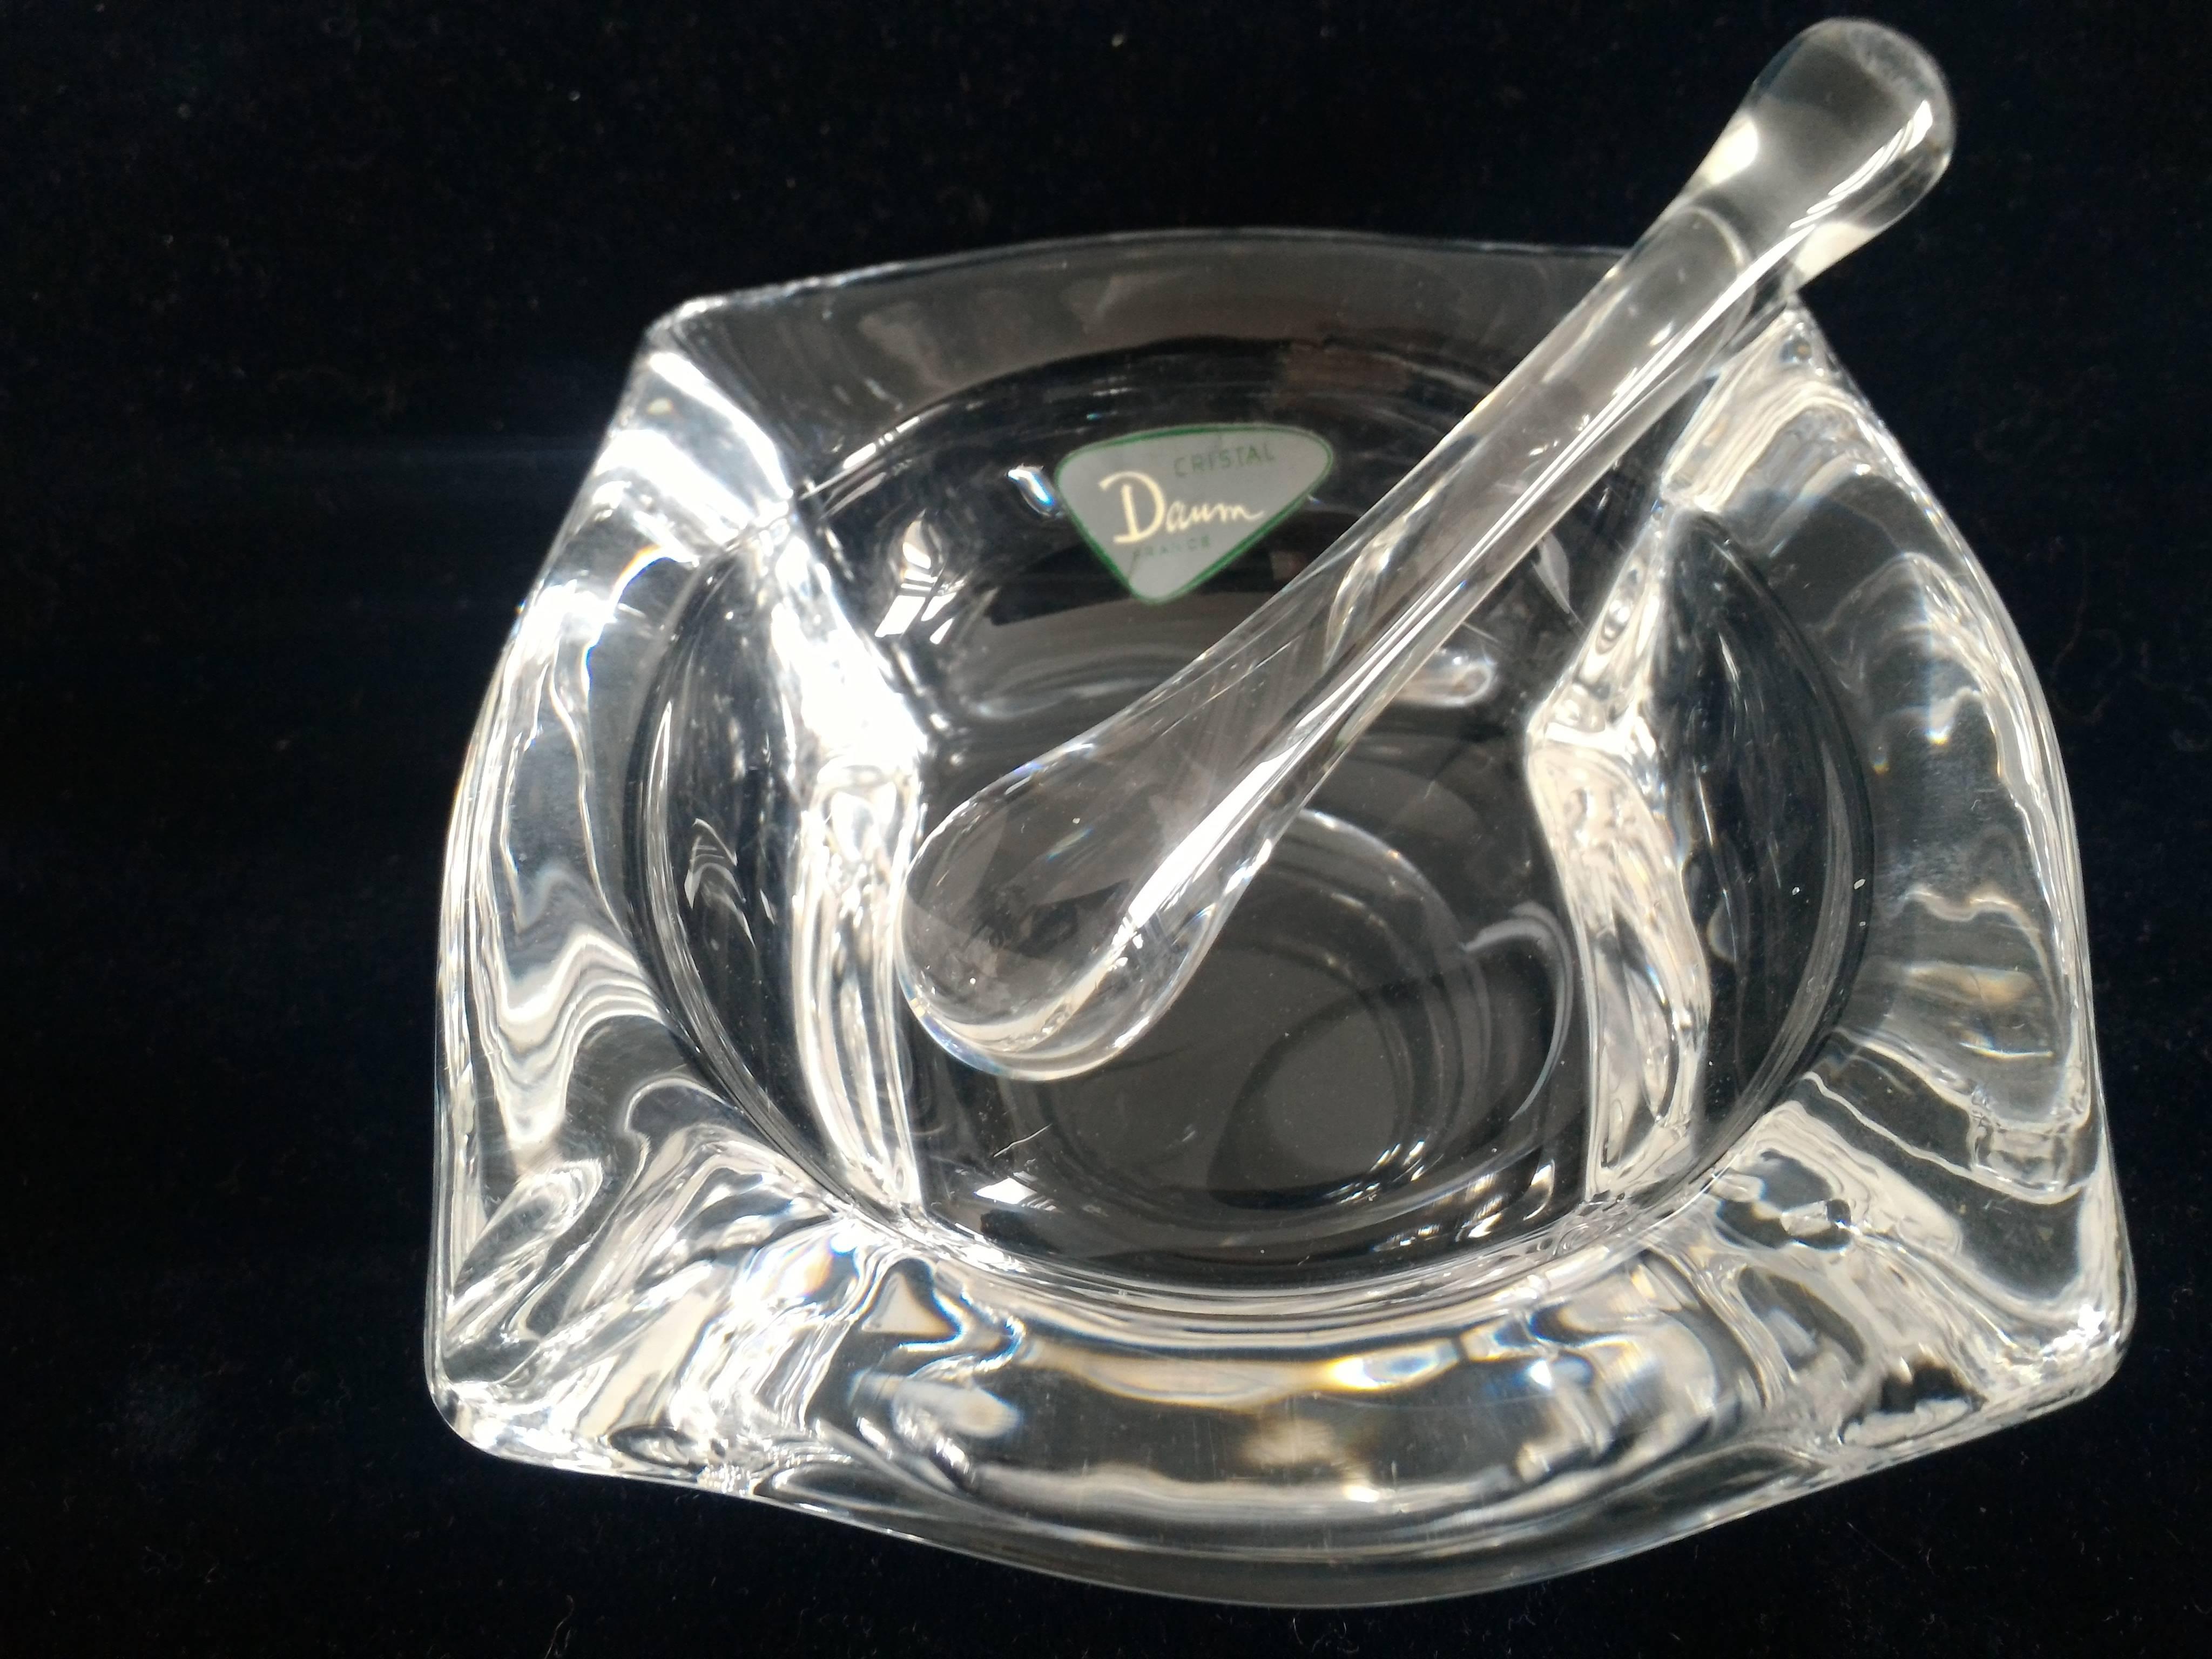 Elegant large size crystal cigar ashtray signed by Daum, mid century French modern with its original gift box, circa 1955.